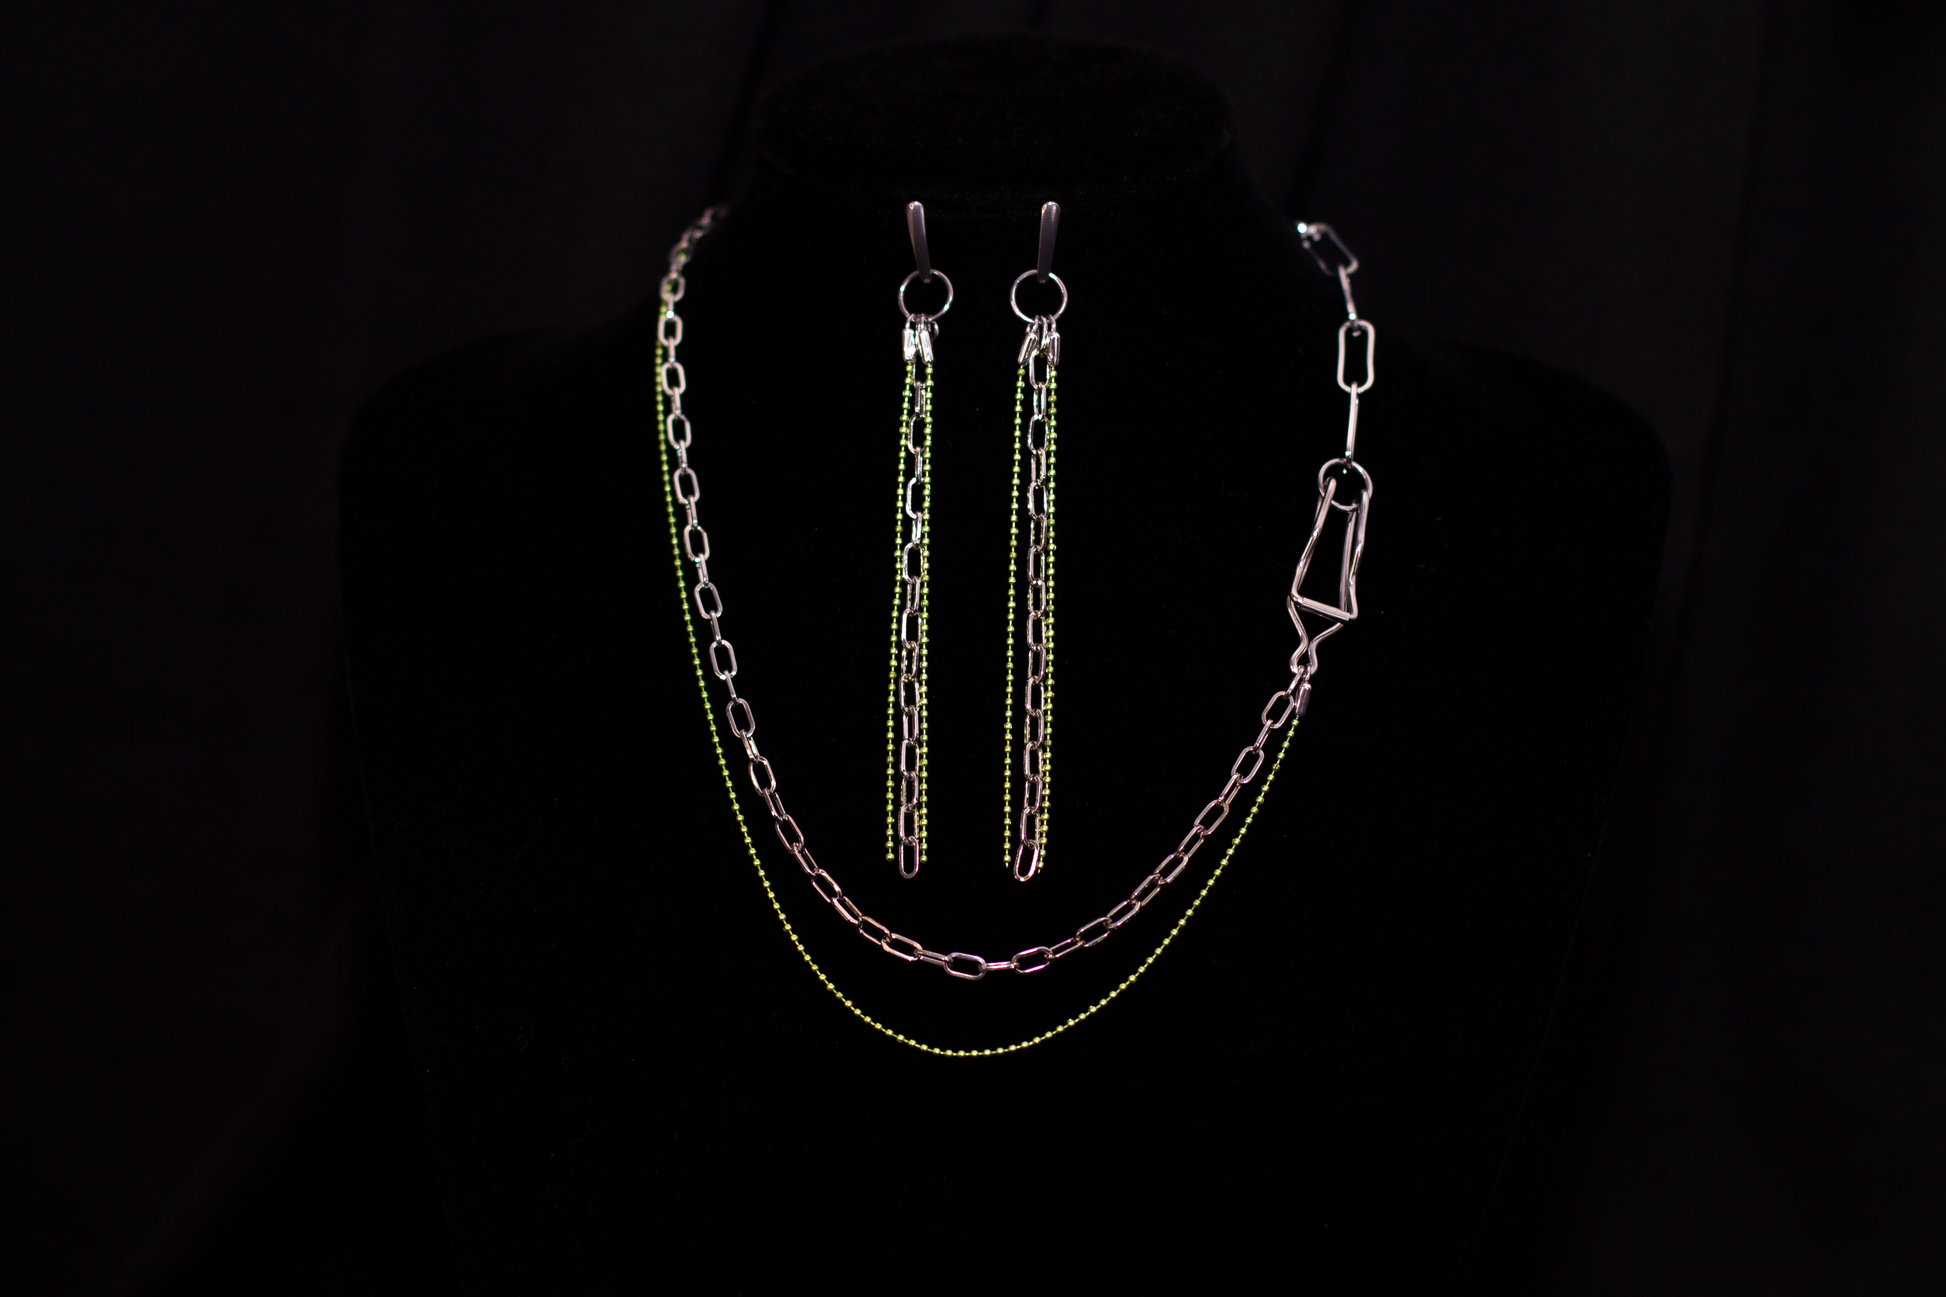 On a black velvet display, a Myril Jewels punk silver necklace with green accents drapes elegantly, accompanied by matching long, slender earrings. The set exemplifies neo-goth style, combining dark-avantgarde design with a touch of vibrant green, ideal for those who love gothic-chic fashion. This jewelry set aligns with the whimsigoth and witchcore aesthetics, making it a unique addition for Halloween, everyday minimal goth wear, or as a standout accessory for rave parties and festival jewels.